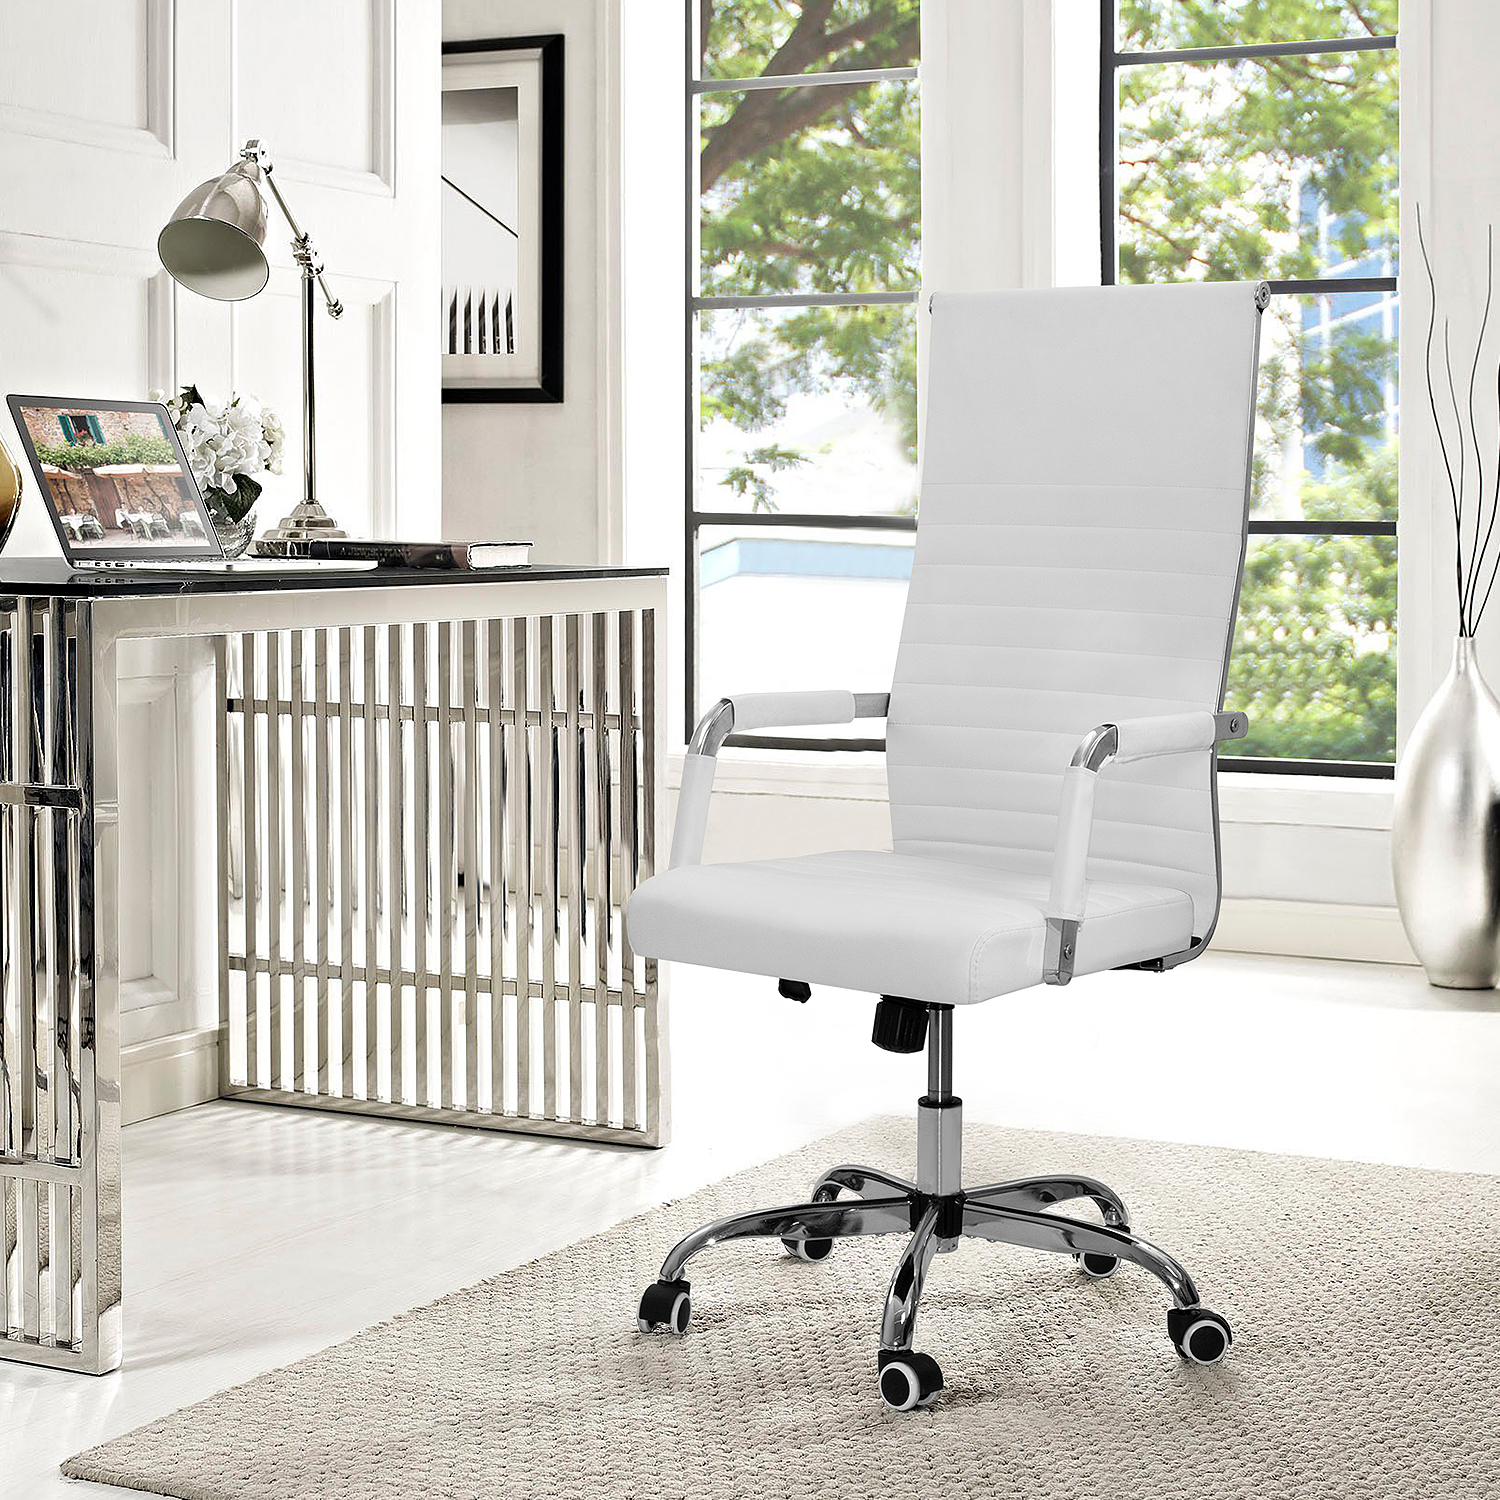 Lacoo High-Back Office Desk Chair Faux Leather Executive Chair with Lumbar Support, White - image 4 of 8